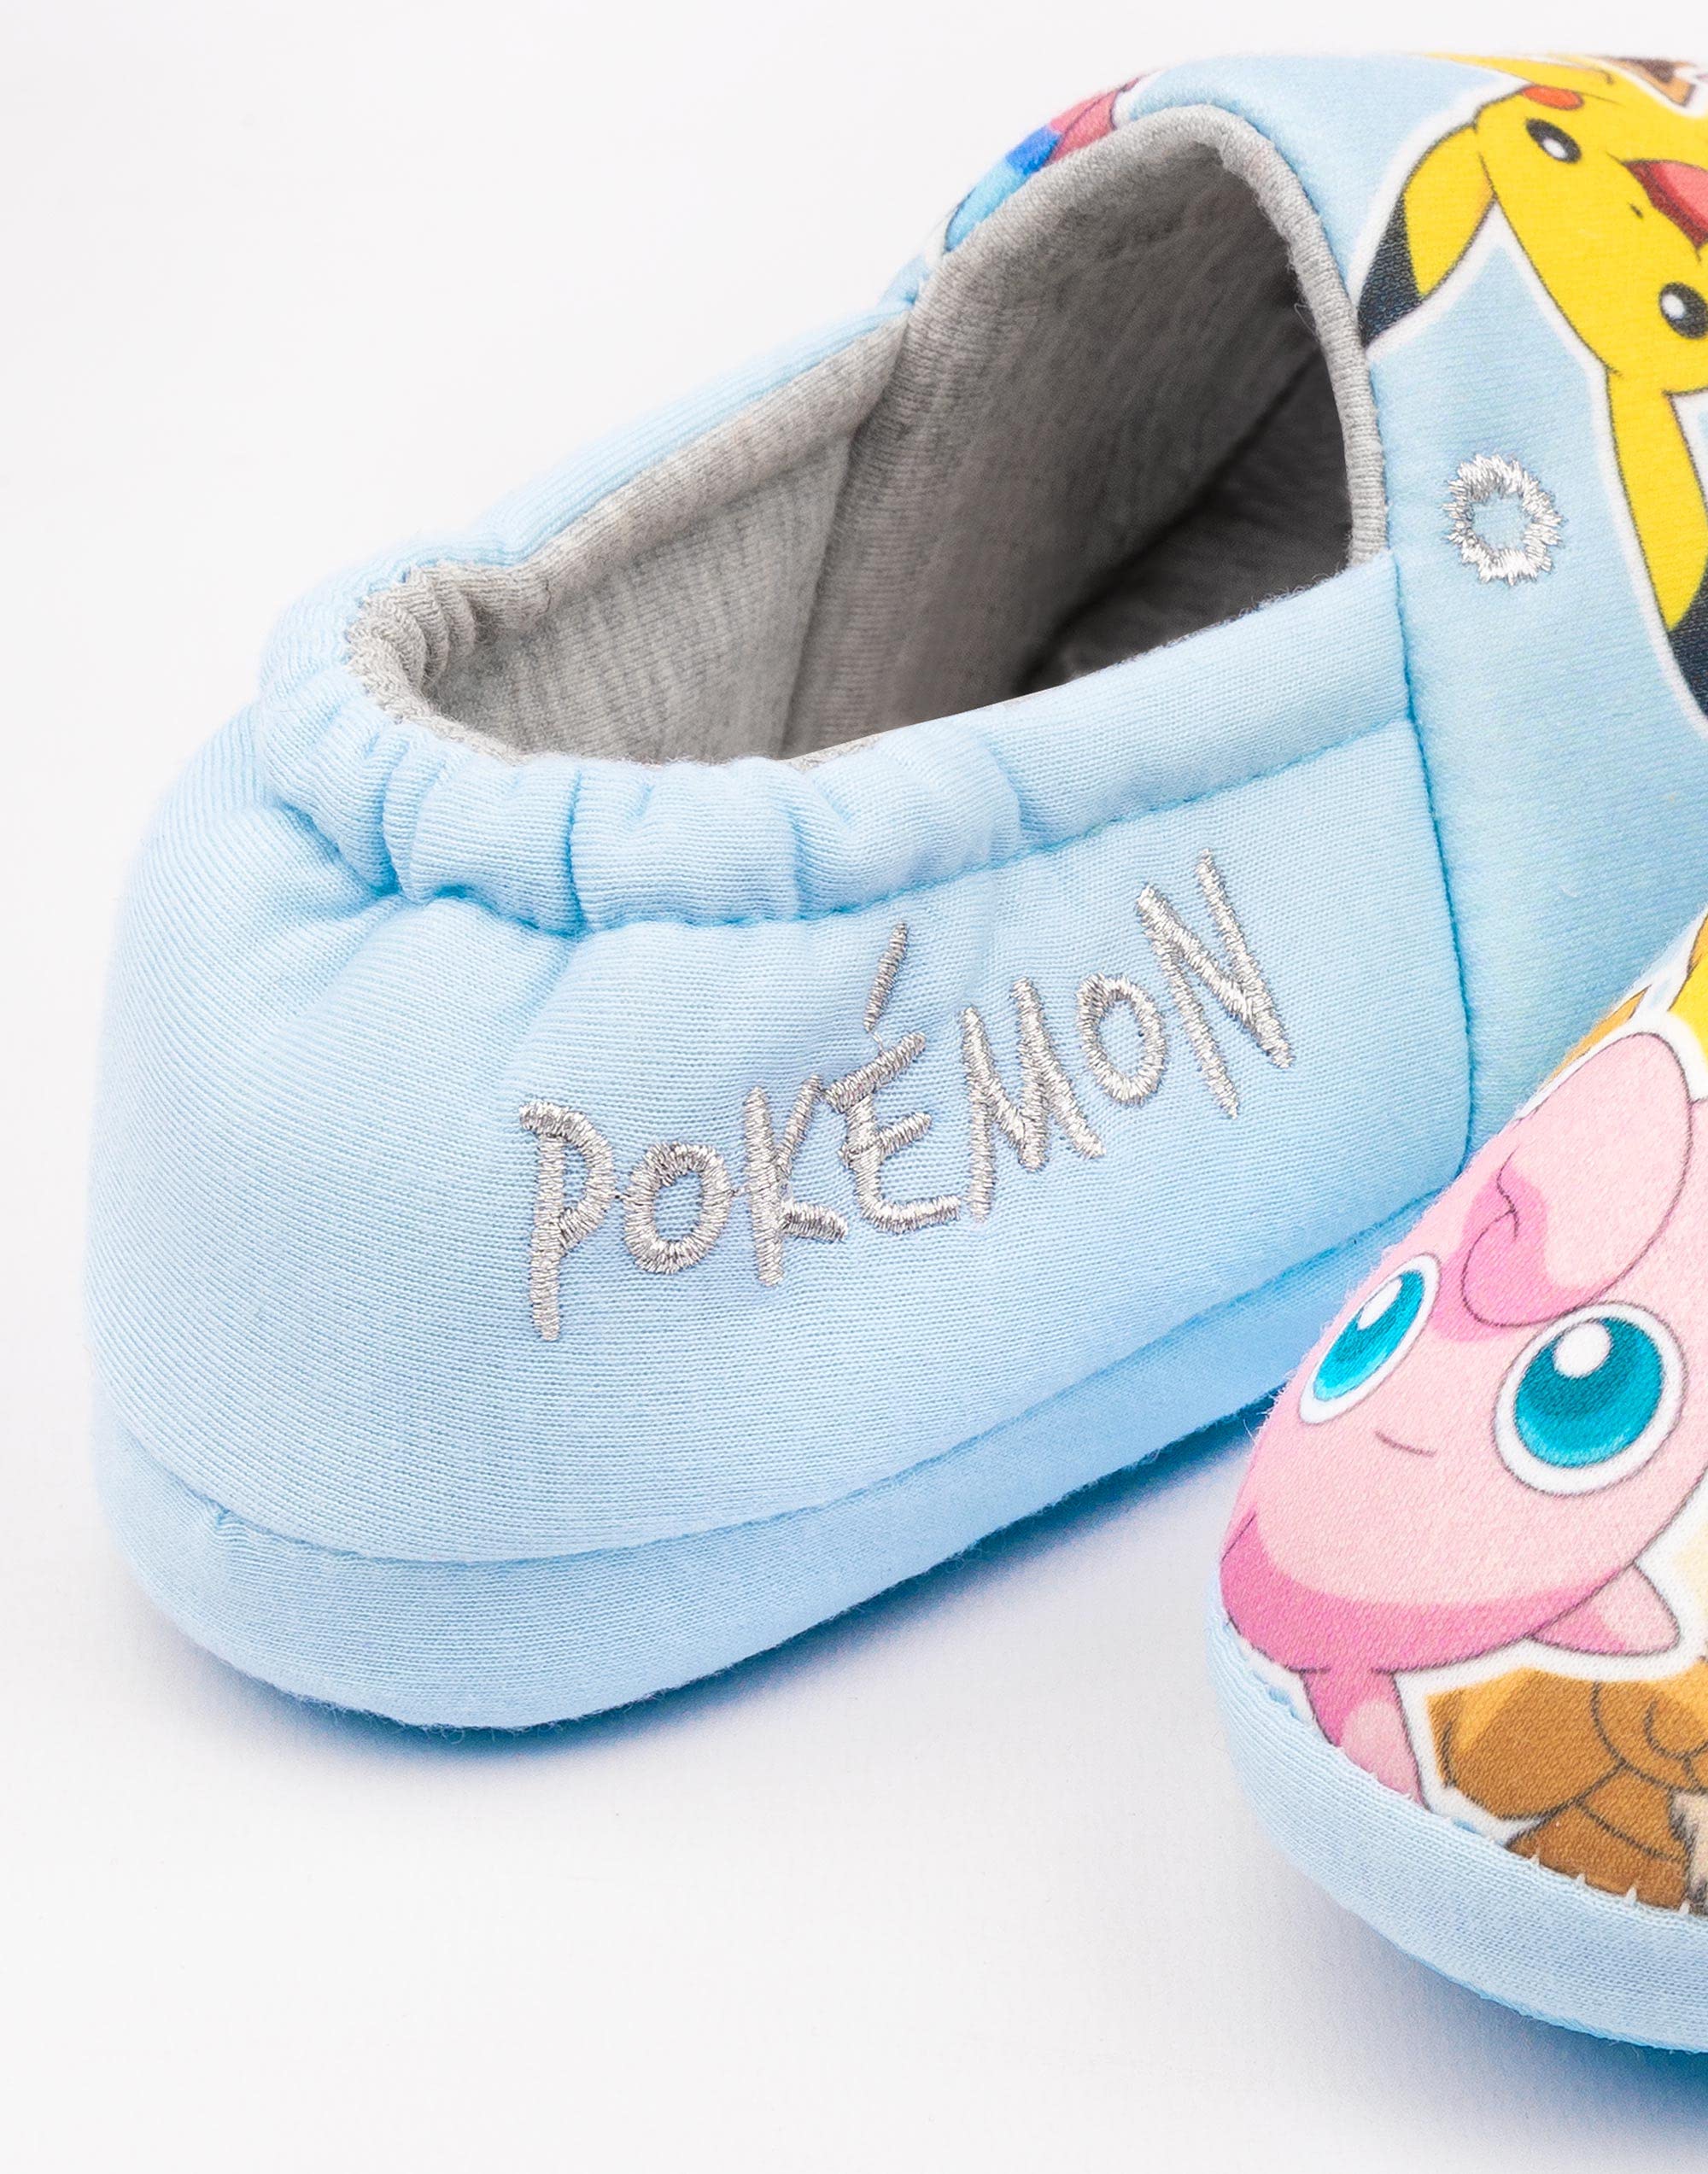 Pokemon Slippers Girls Kids Pikachu Sylveon Evee Blue Shoes Loafers